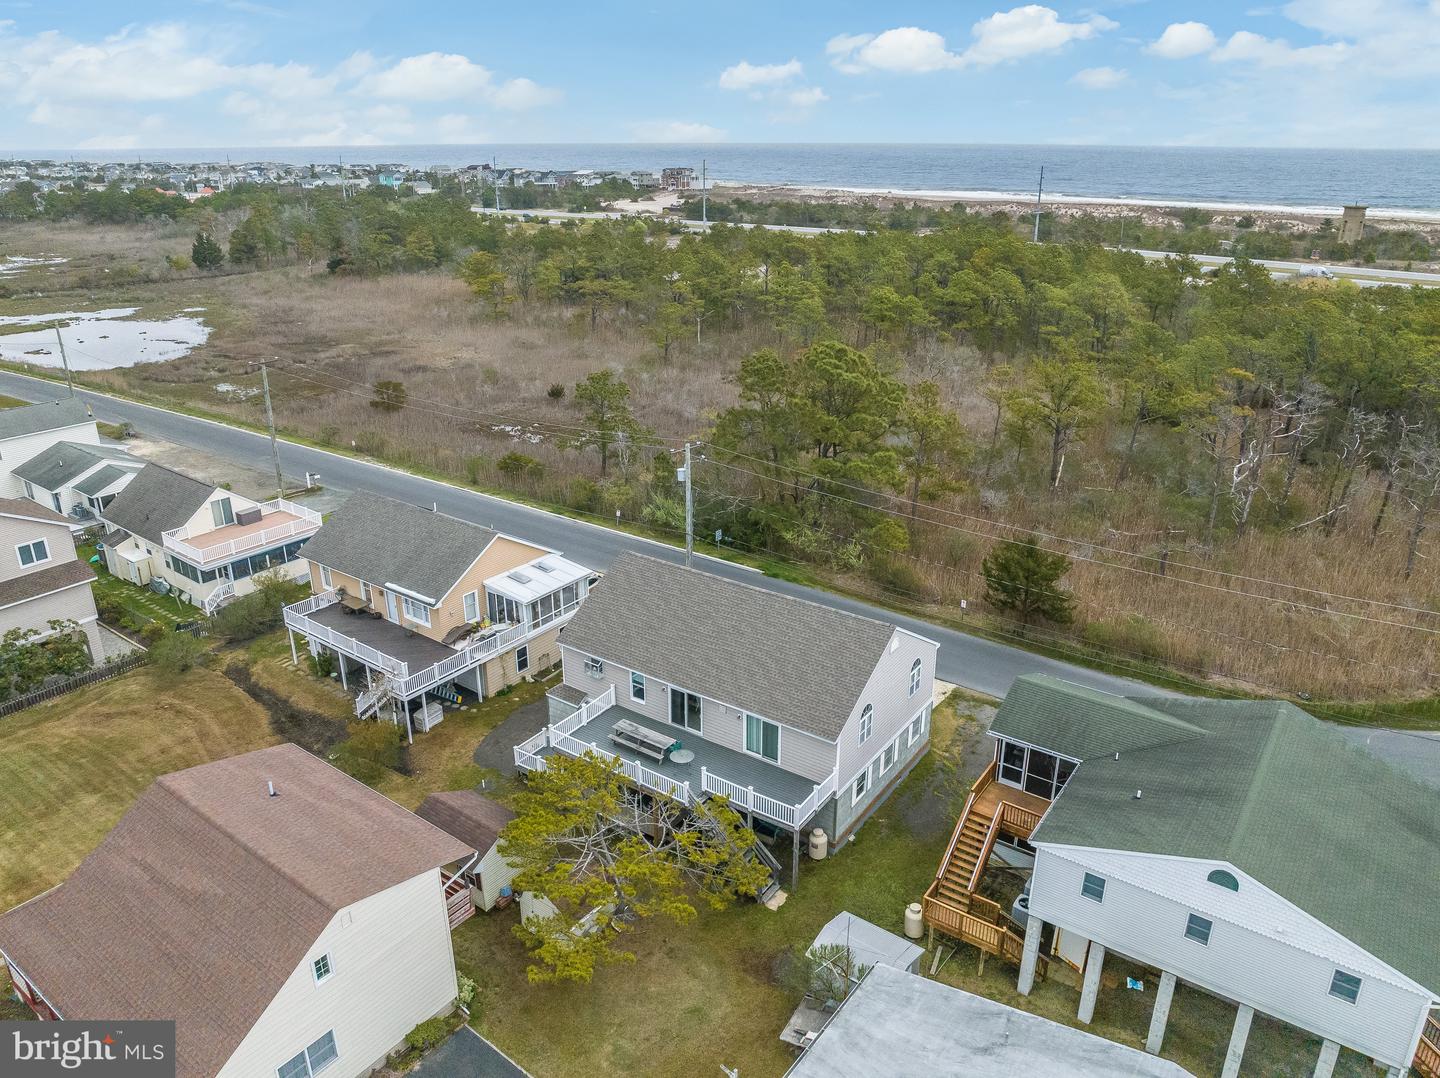 DESU2060190-803009595556-2024-04-21-00-08-05 35205 Hassell Ave | Bethany Beach, DE Real Estate For Sale | MLS# Desu2060190  - 1st Choice Properties